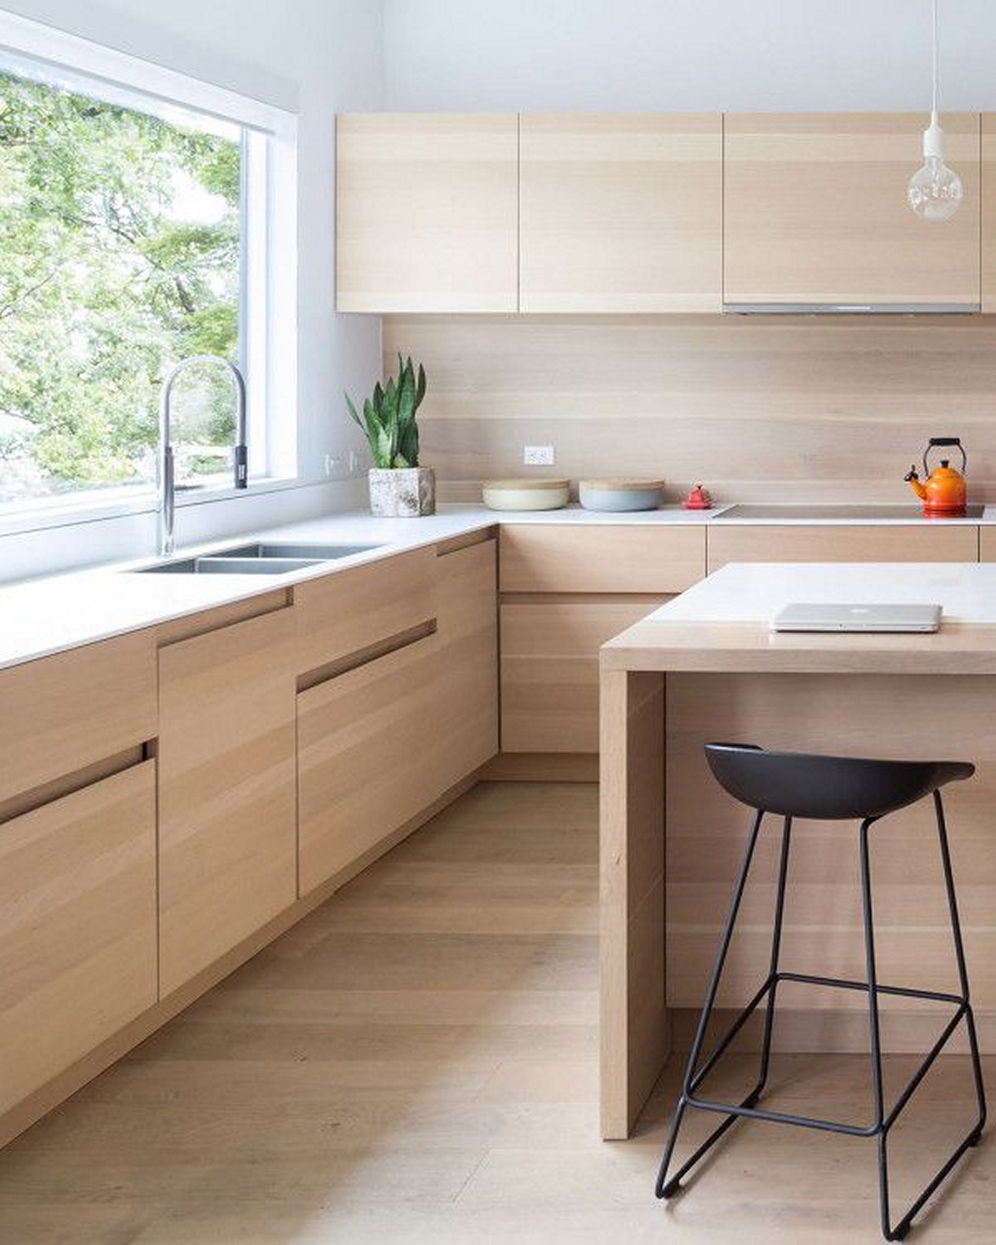 Smart, modern kitchen design, functionality and simplicity in one 4